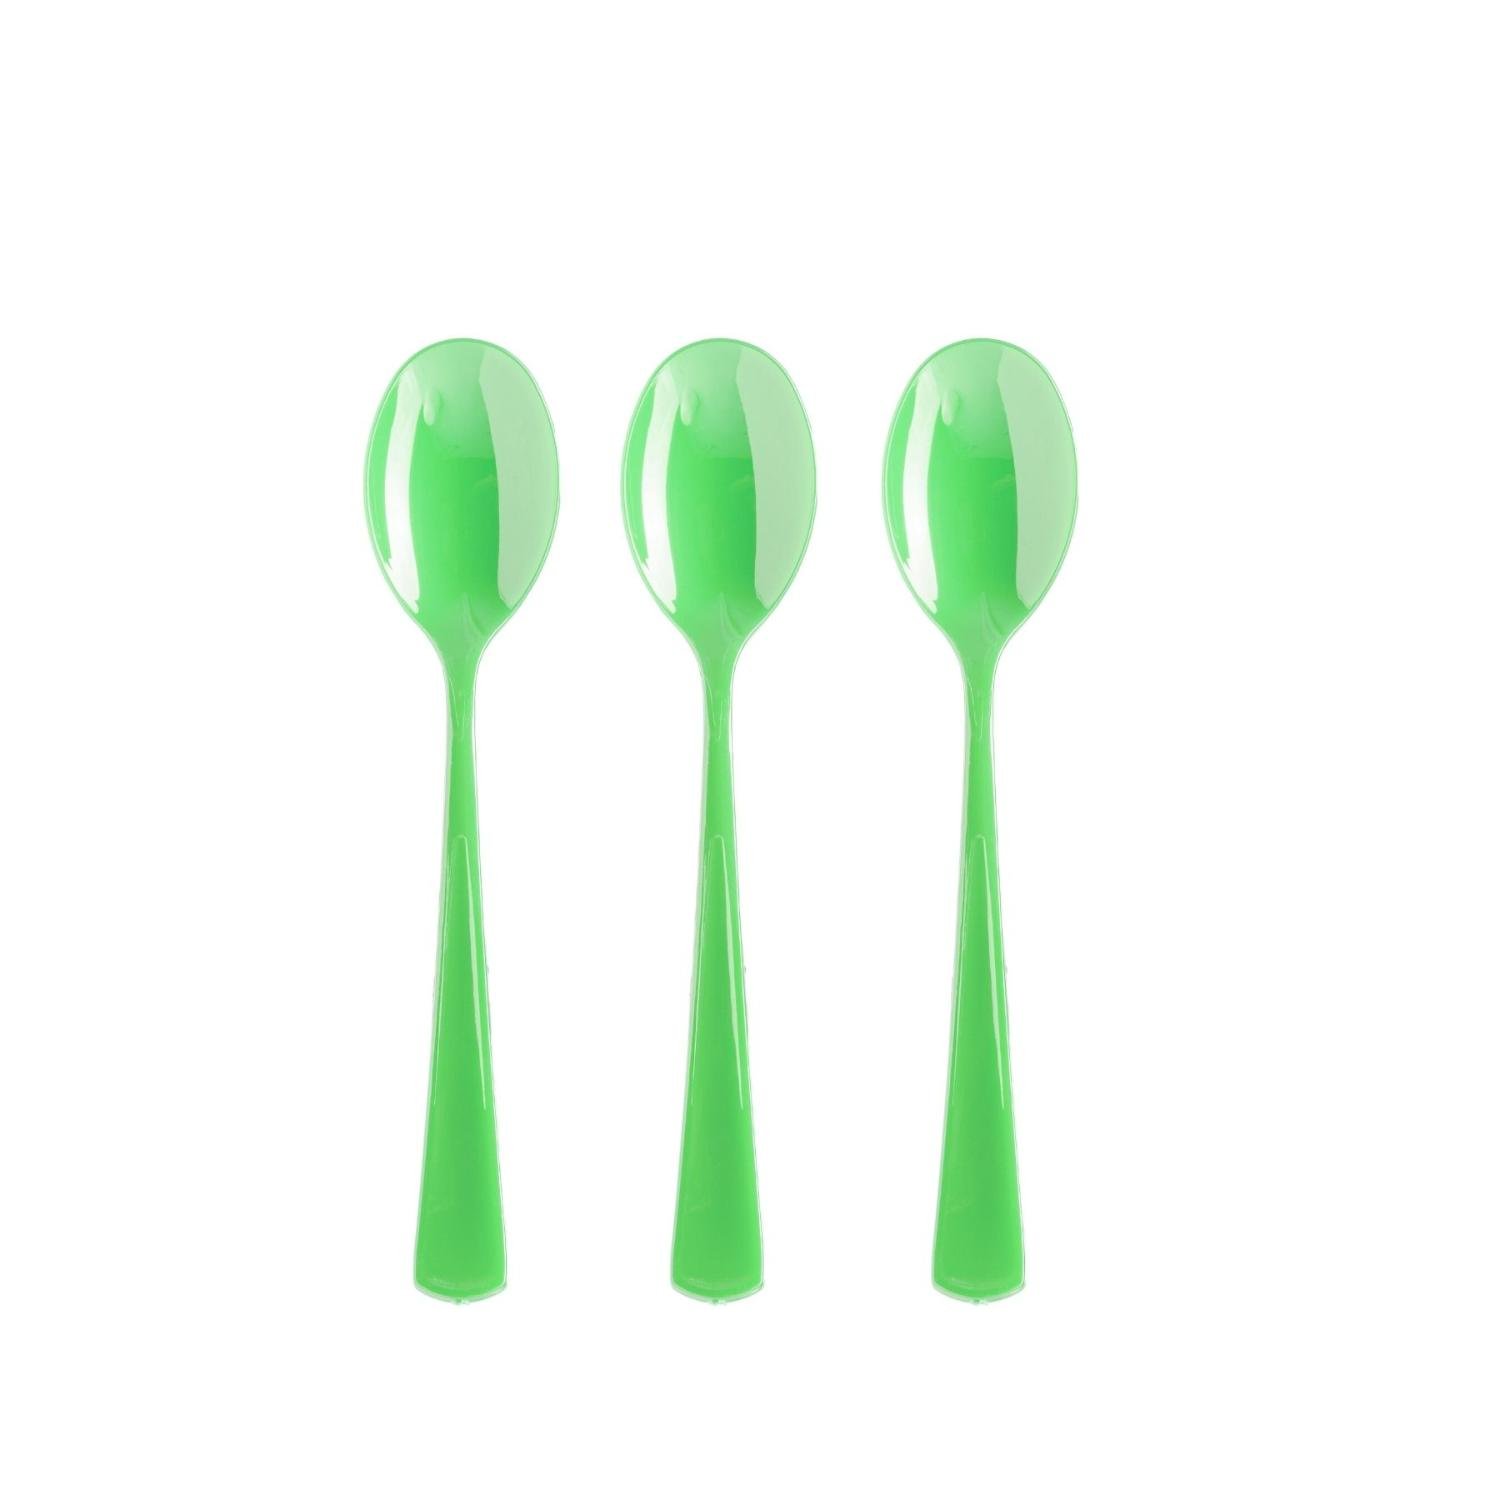 Plastic Spoons Lime Green - 1200 ct.